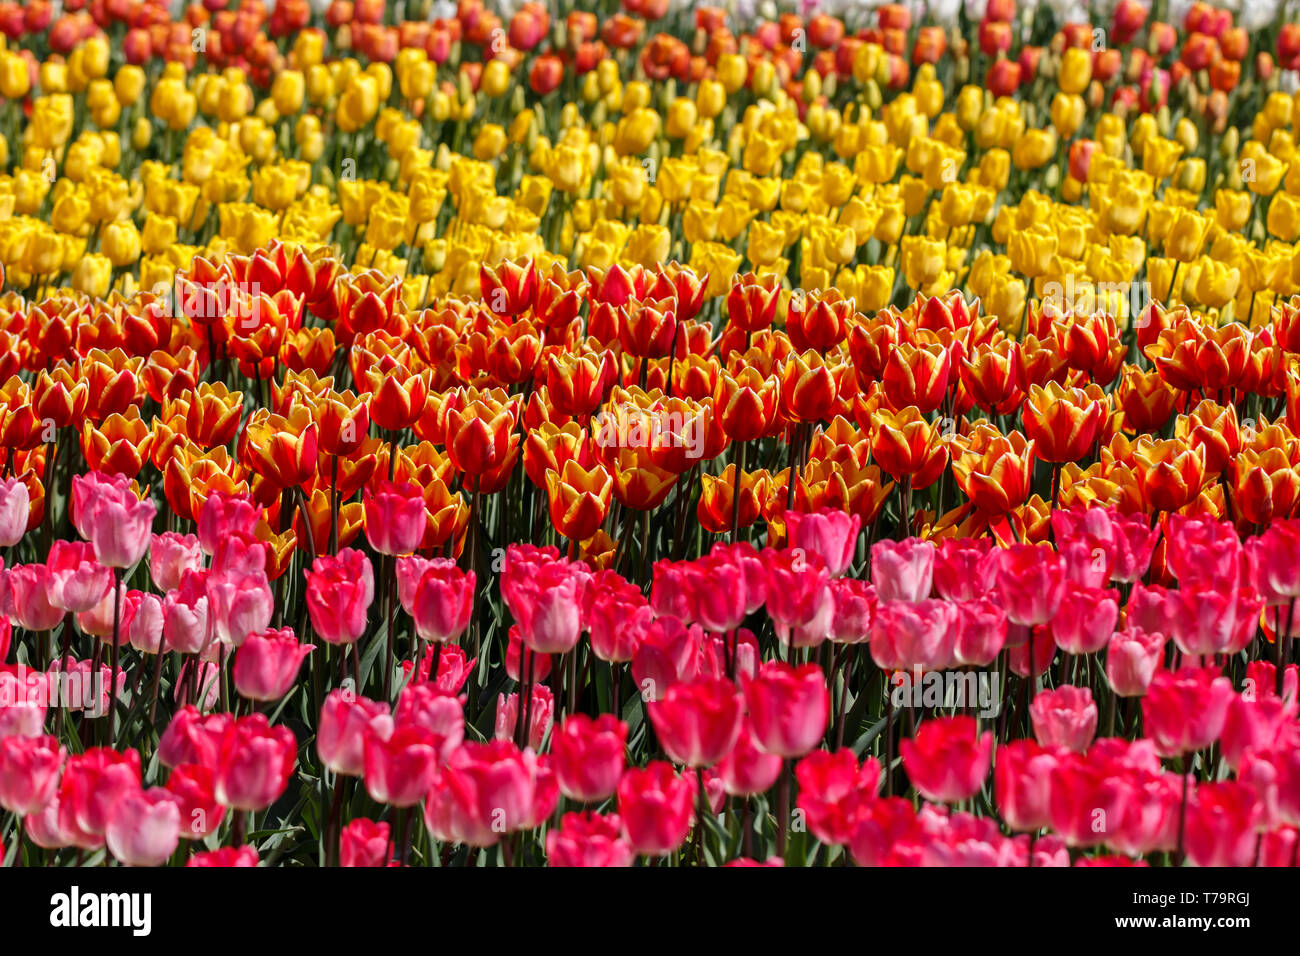 Multiple Rows of Pink Orange and Yellow Spring Tulip Flowers Stock Photo